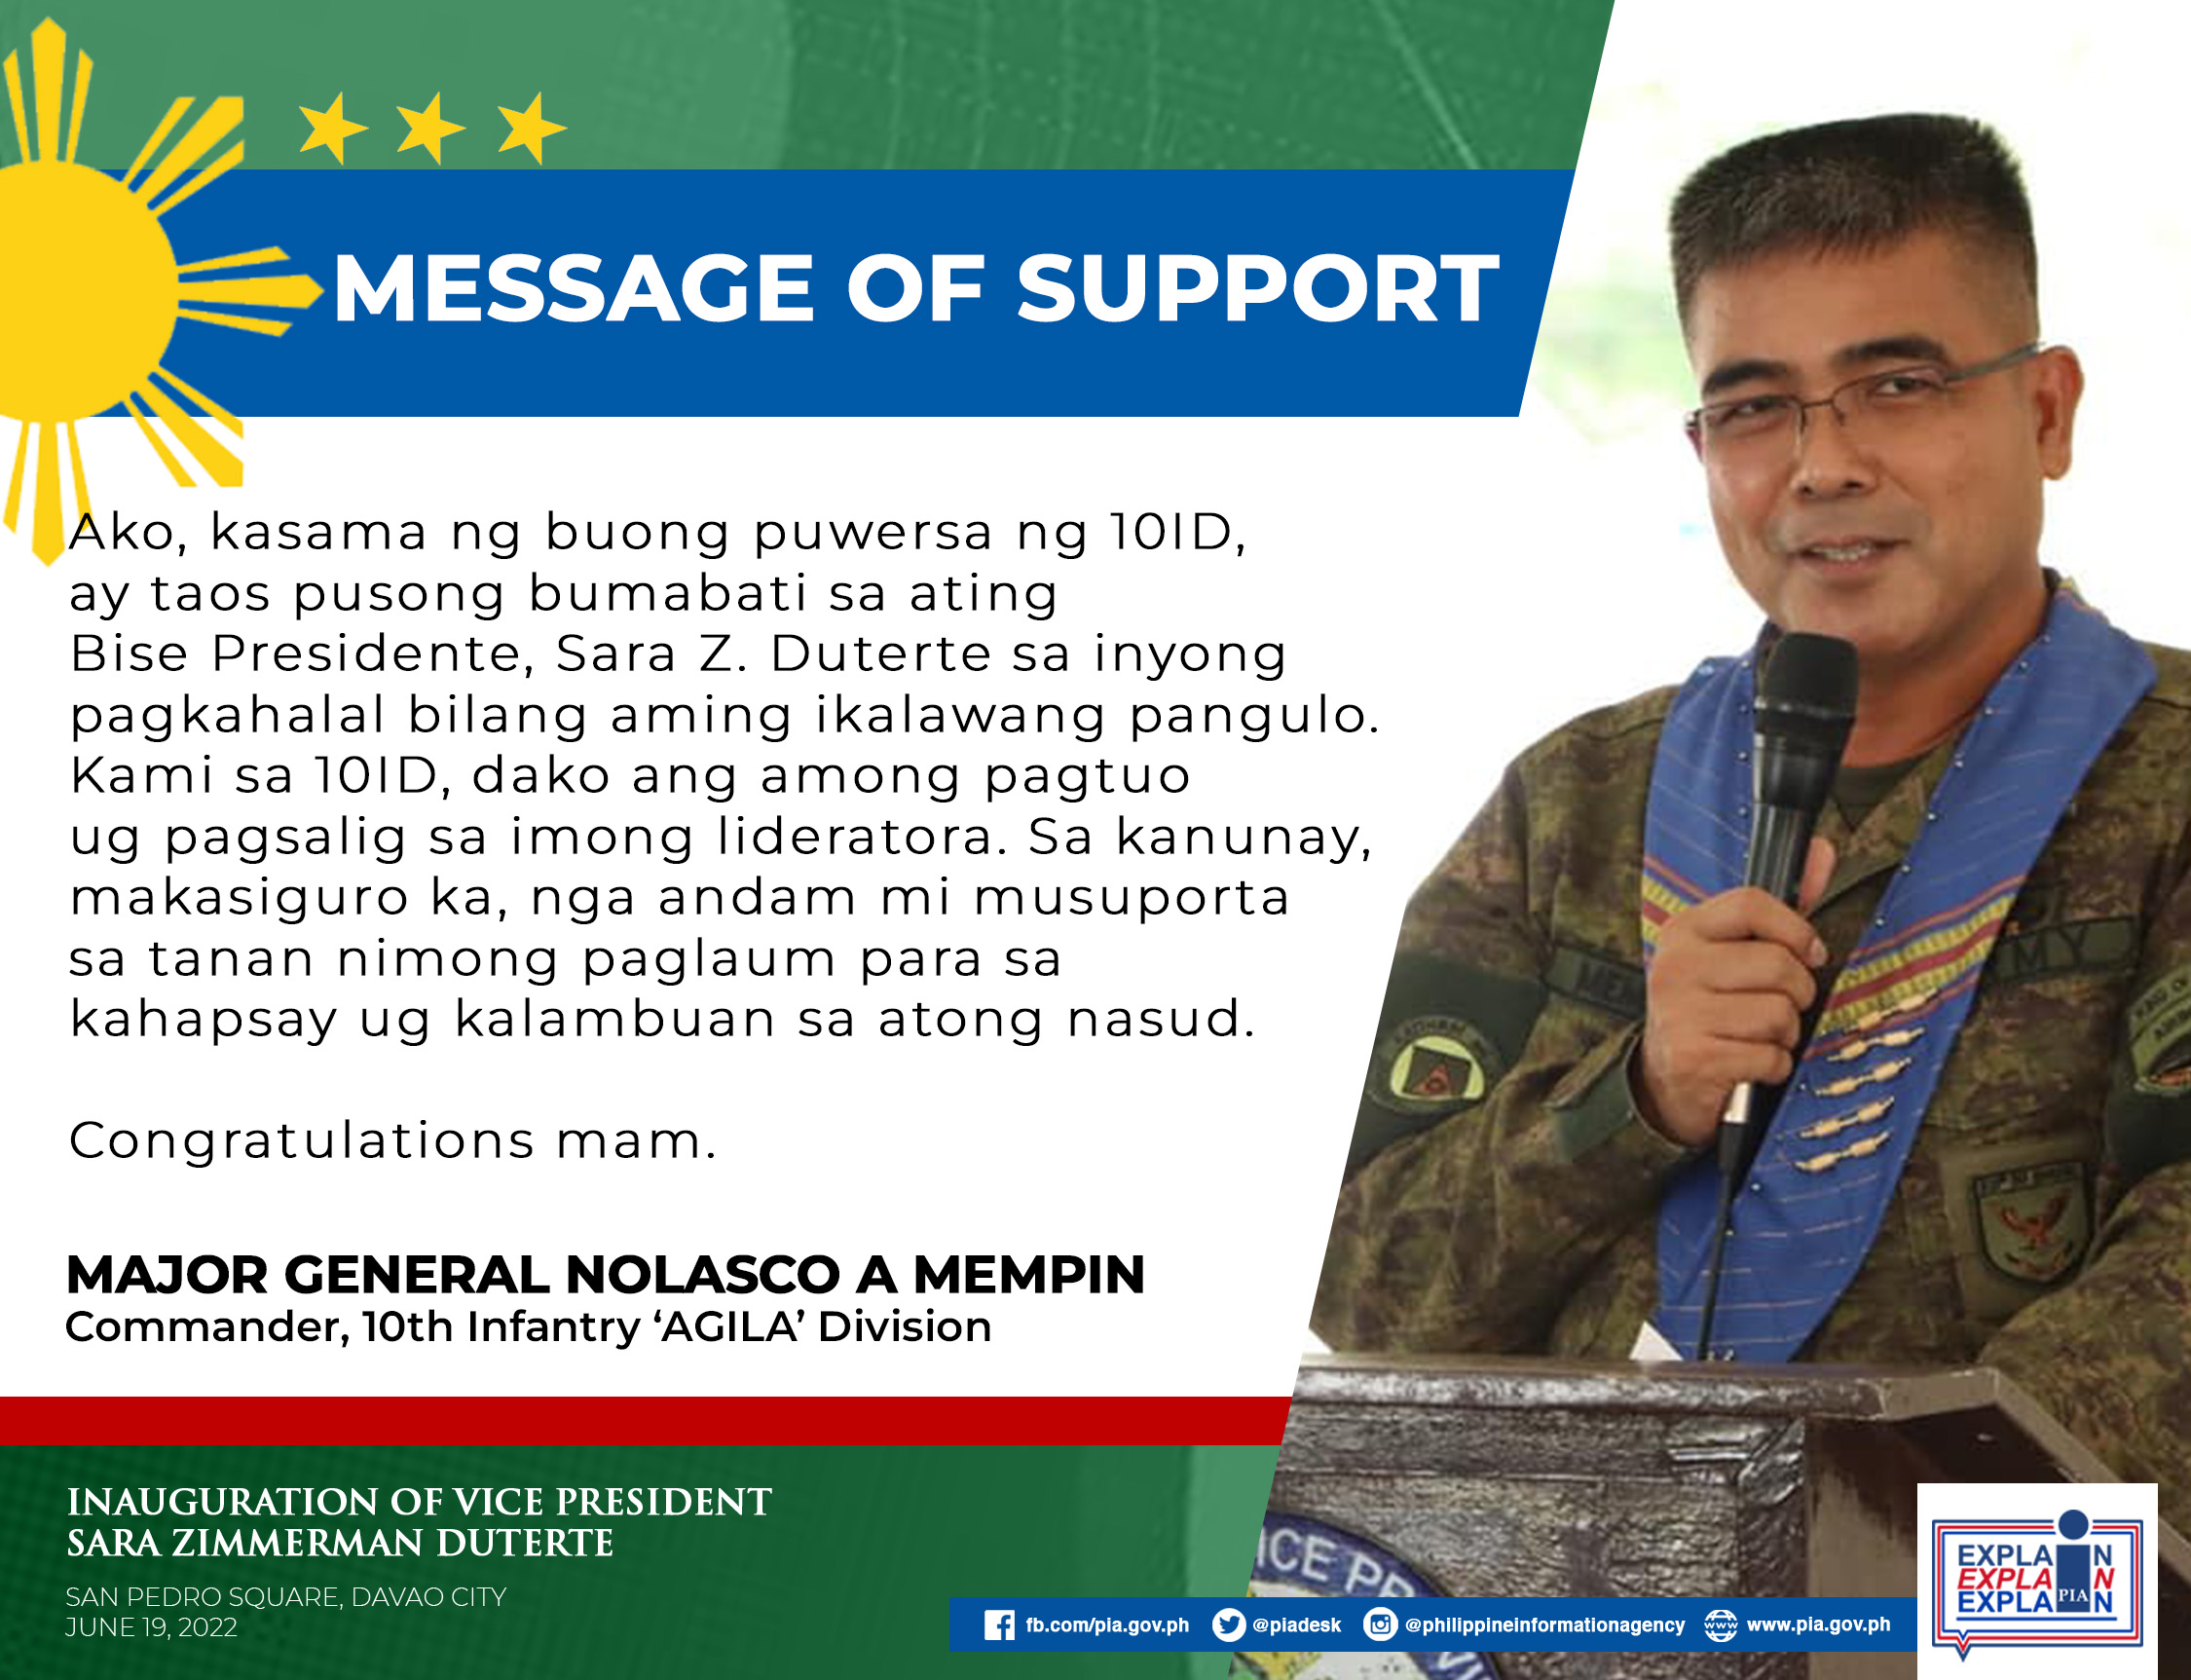 Message of 10th Infantry ‘AGILA Division Commander, Major General Nolasco A Mempin on the Inauguration of Vice President elect Sara Duterte